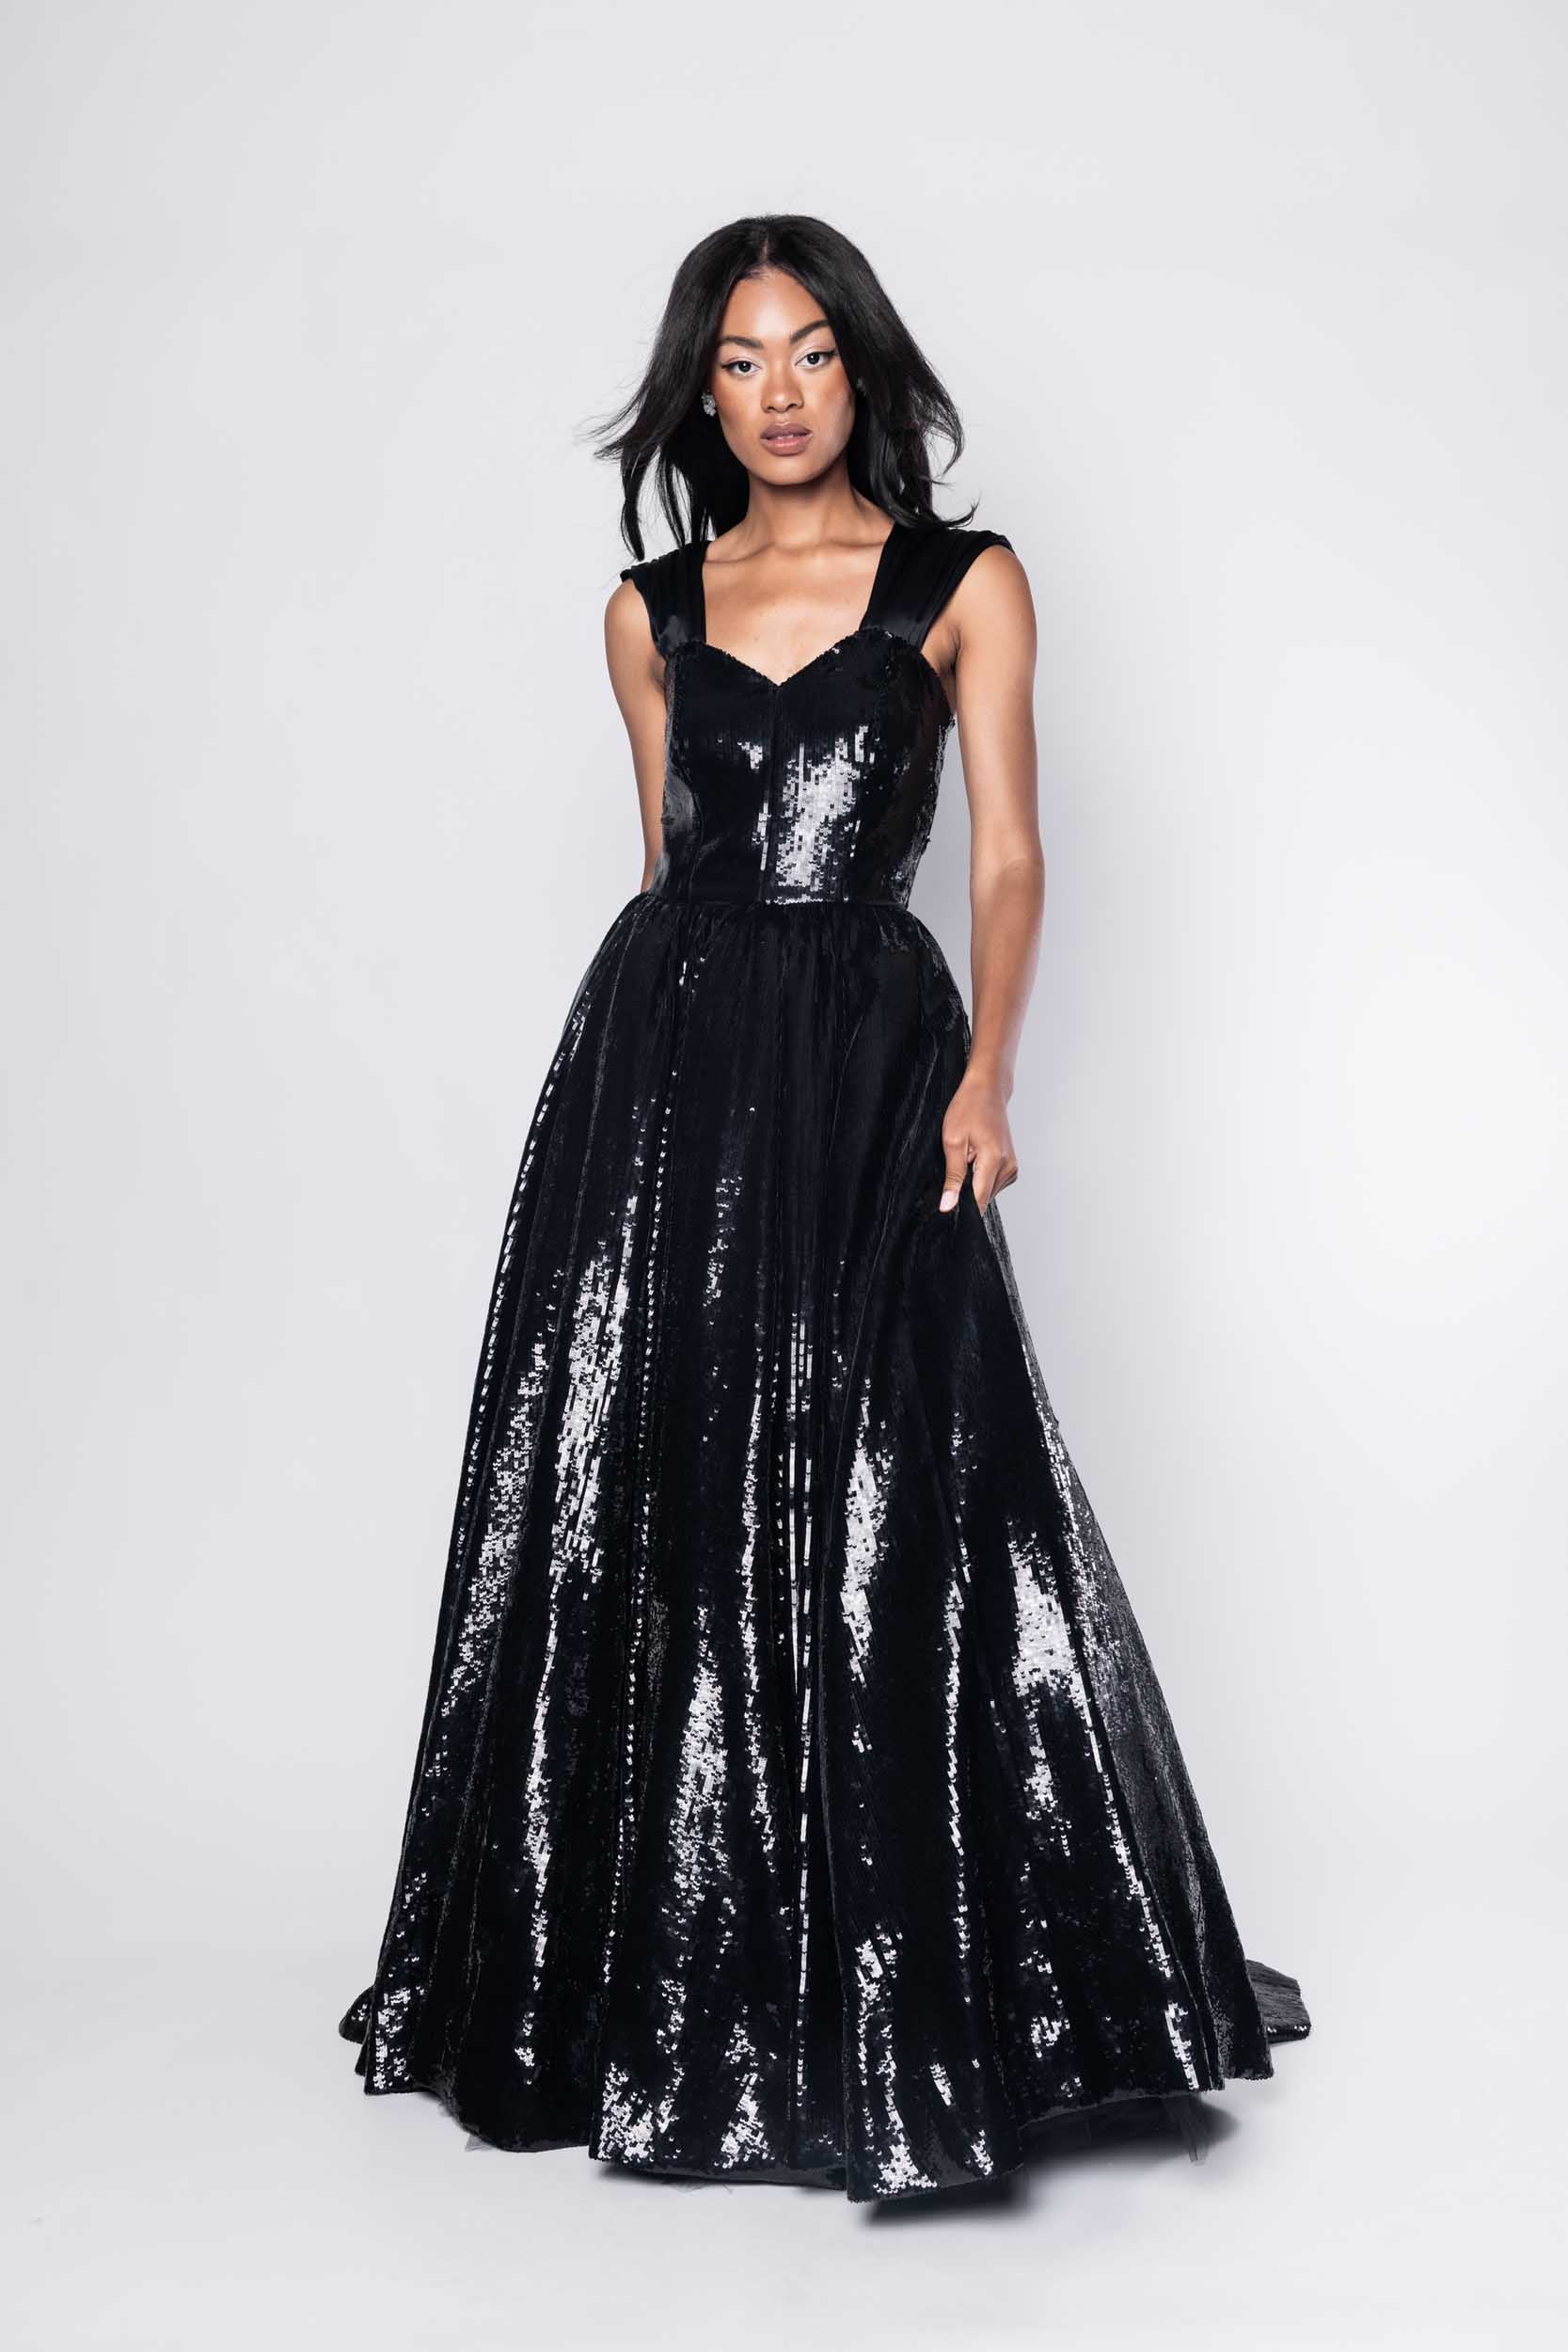 Beautiful model in an sequined, floor-length Sujata Gazder ball gown - front view